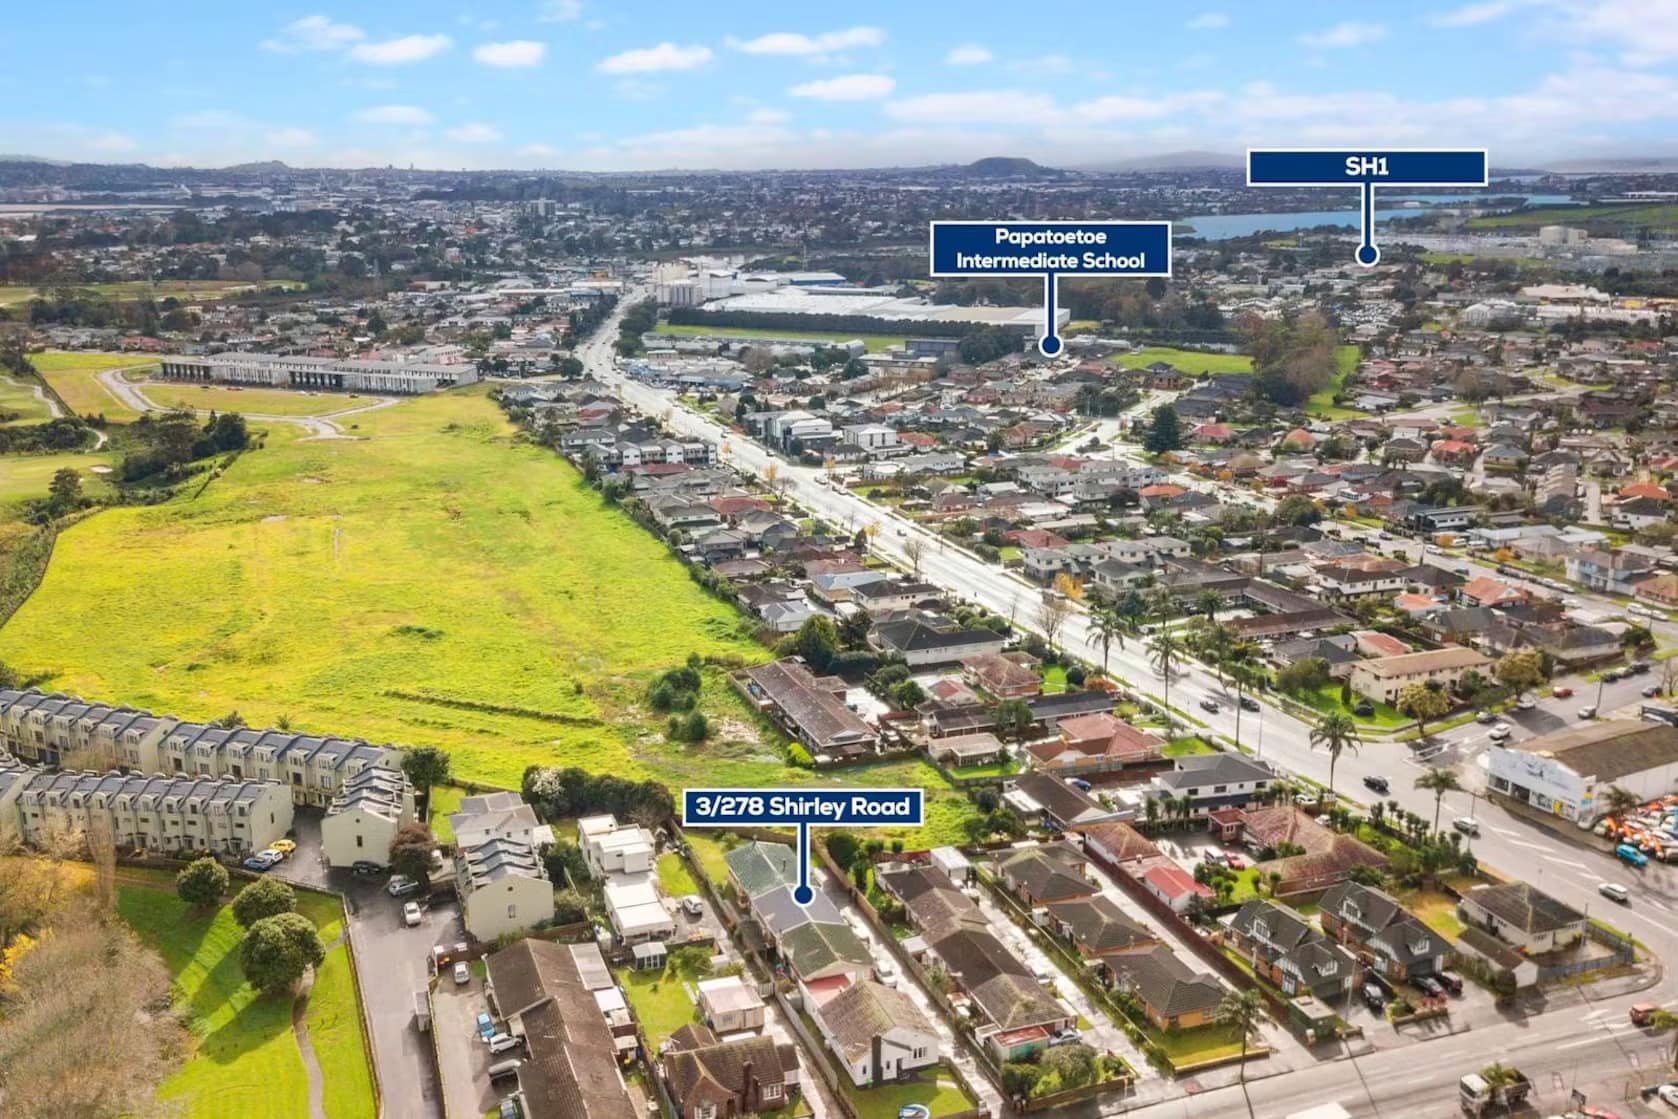 Mose-Real-Estate-Properties-for-sale-3-278-shirley-road-papatoetoe-13